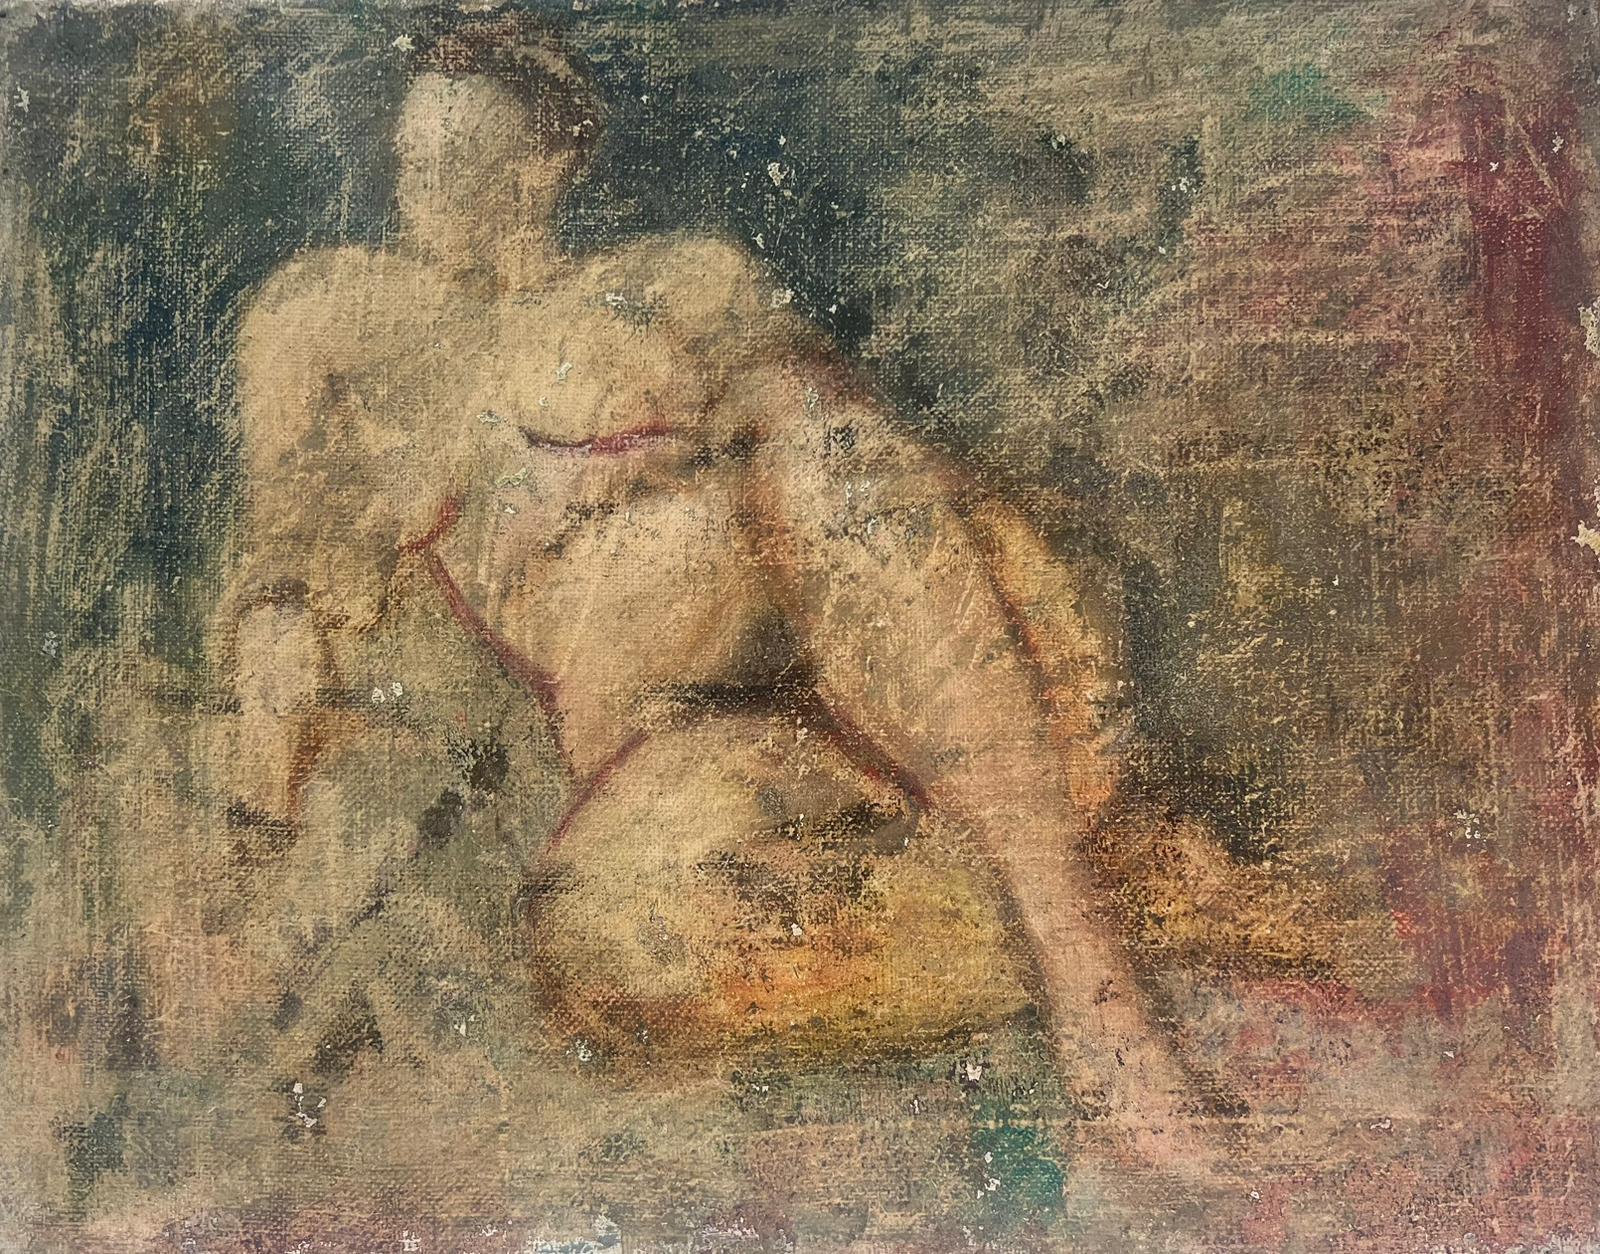 Josine Vignon Nude Painting - 1950s French Oil Sketch of Reclining Nude Lady Atmospheric Work